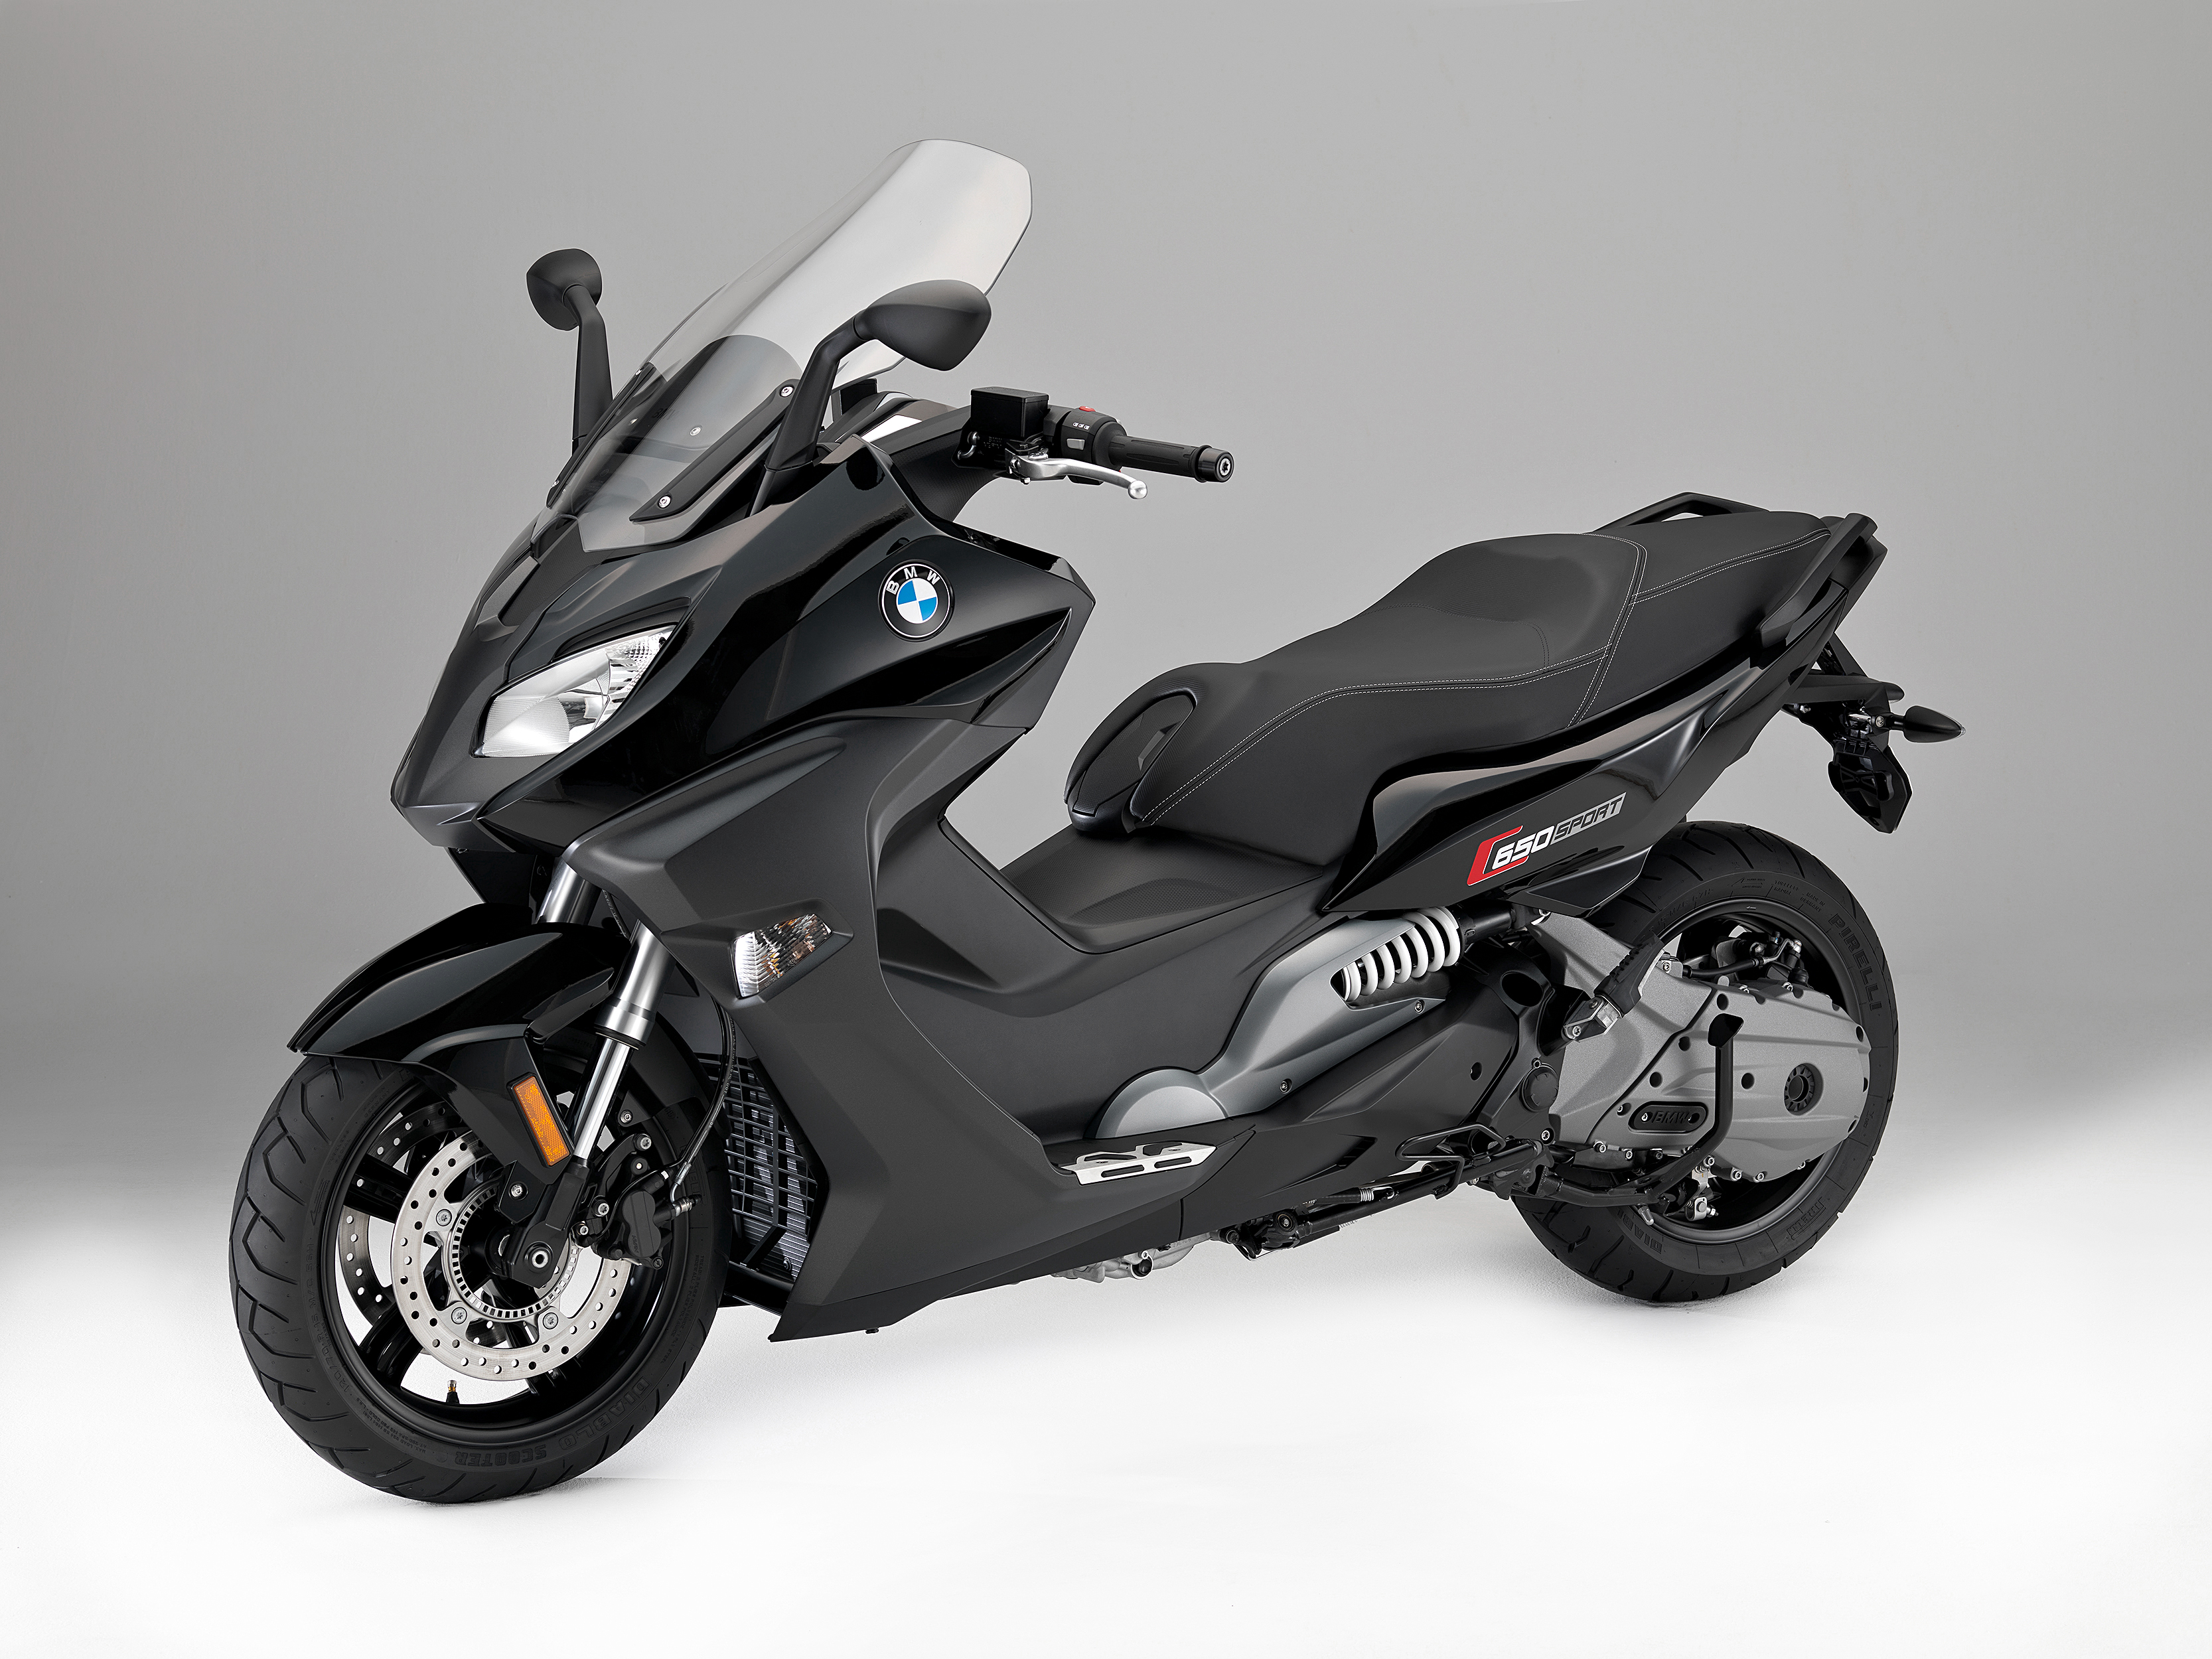 Updates for BMW C 650 Sport and C 650 GT